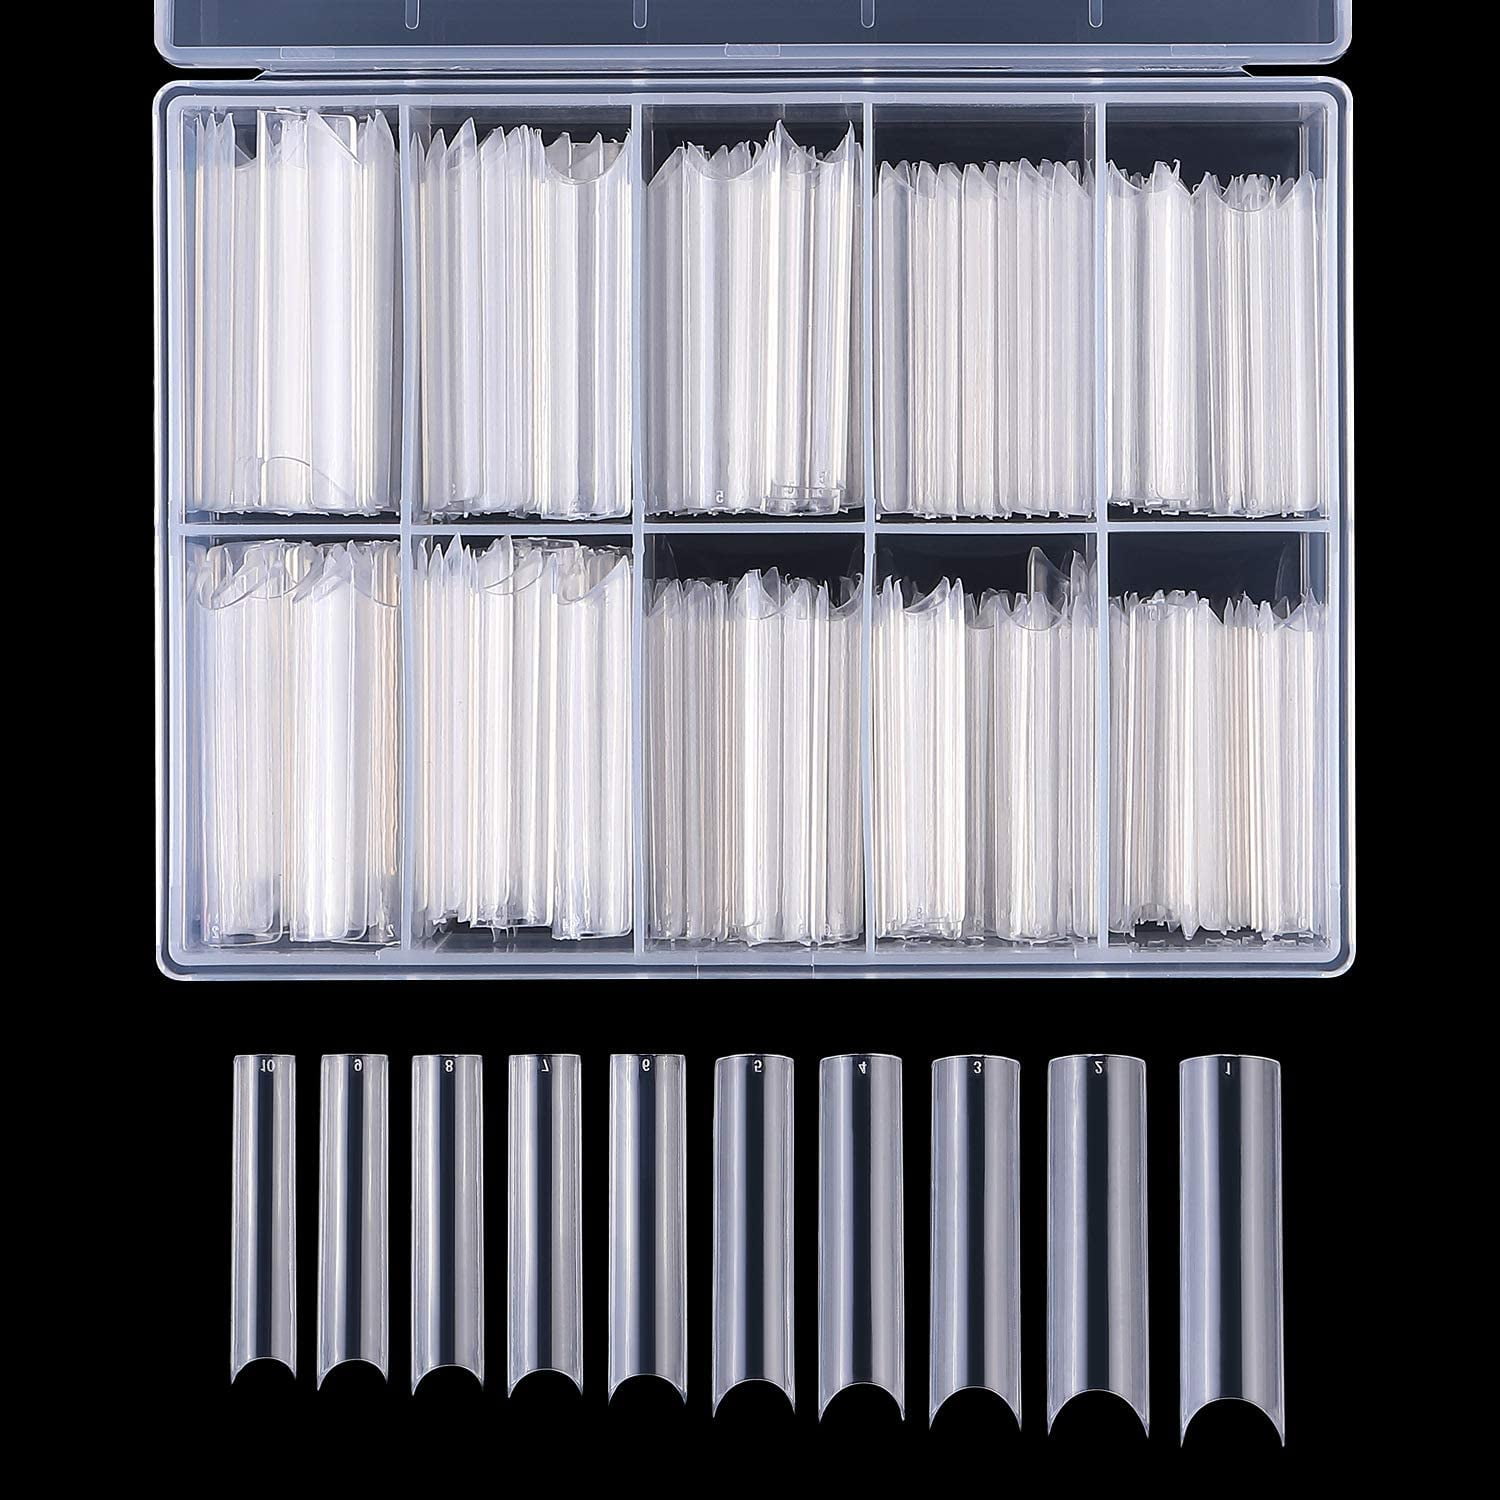 200 Ct XXL Long Straight Square Shape Tips for Acrylic False Nail with Box (Clear)